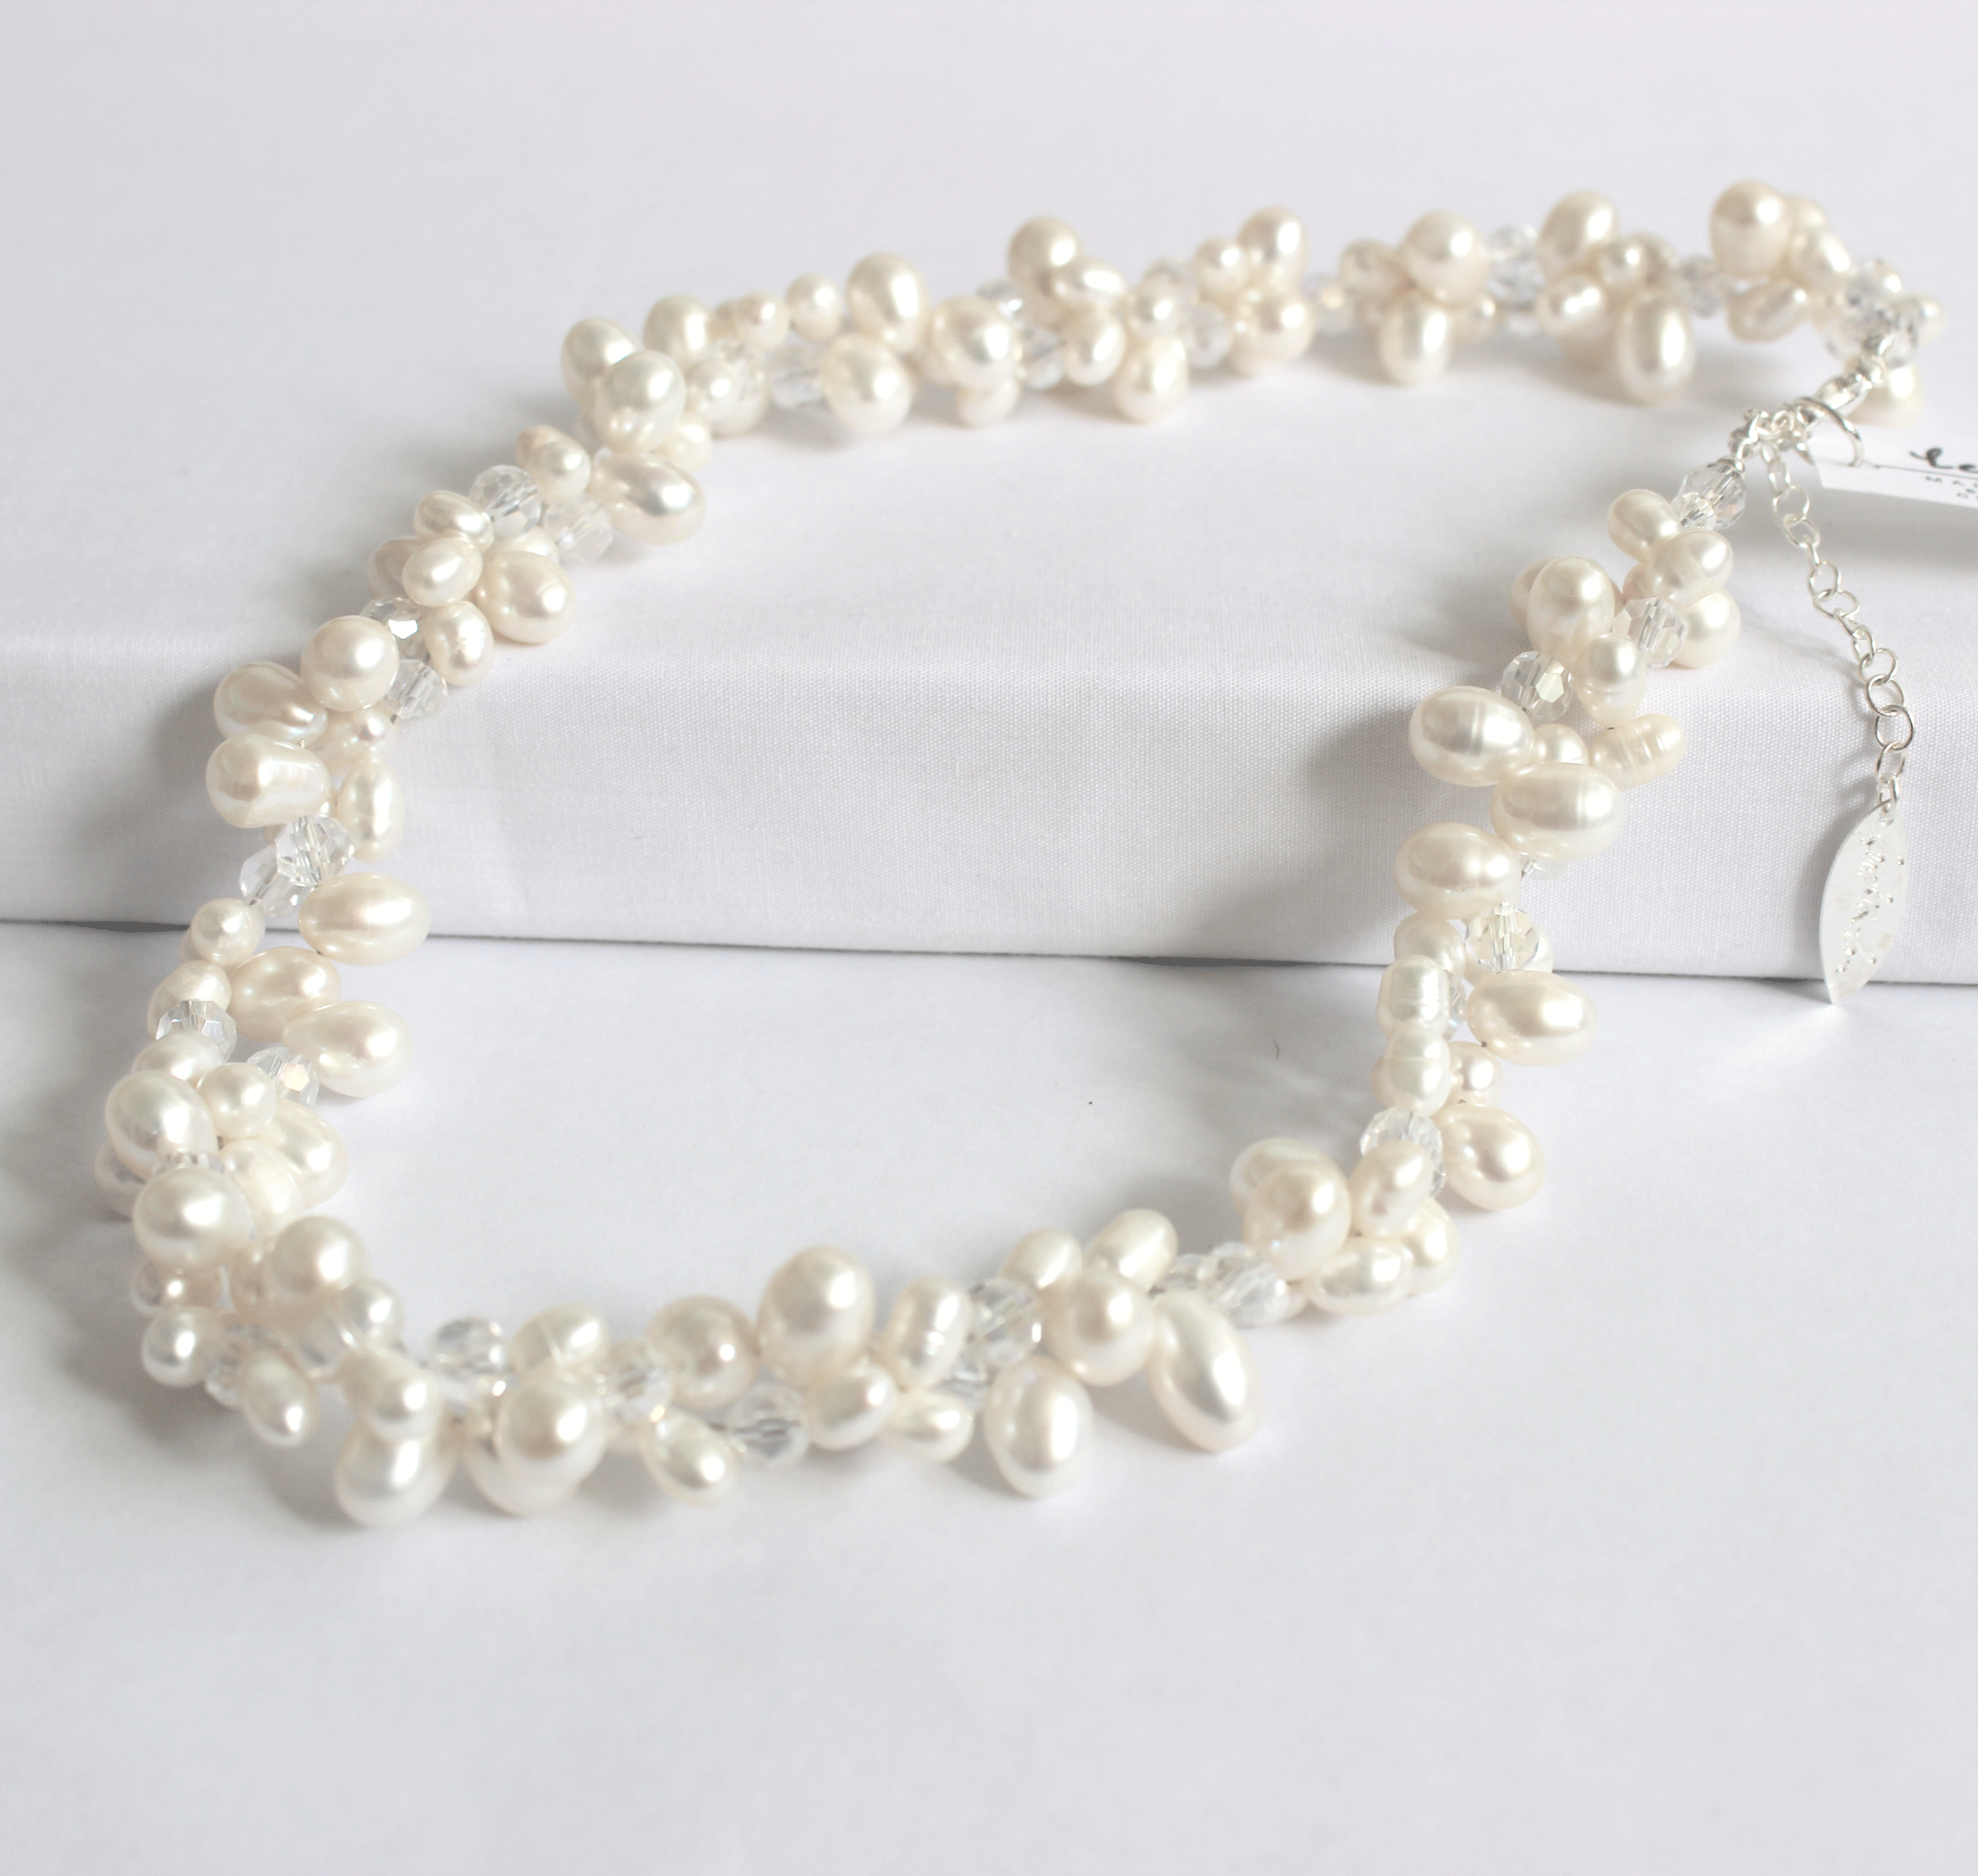 2-strand Freshwater Pearl Necklace - White